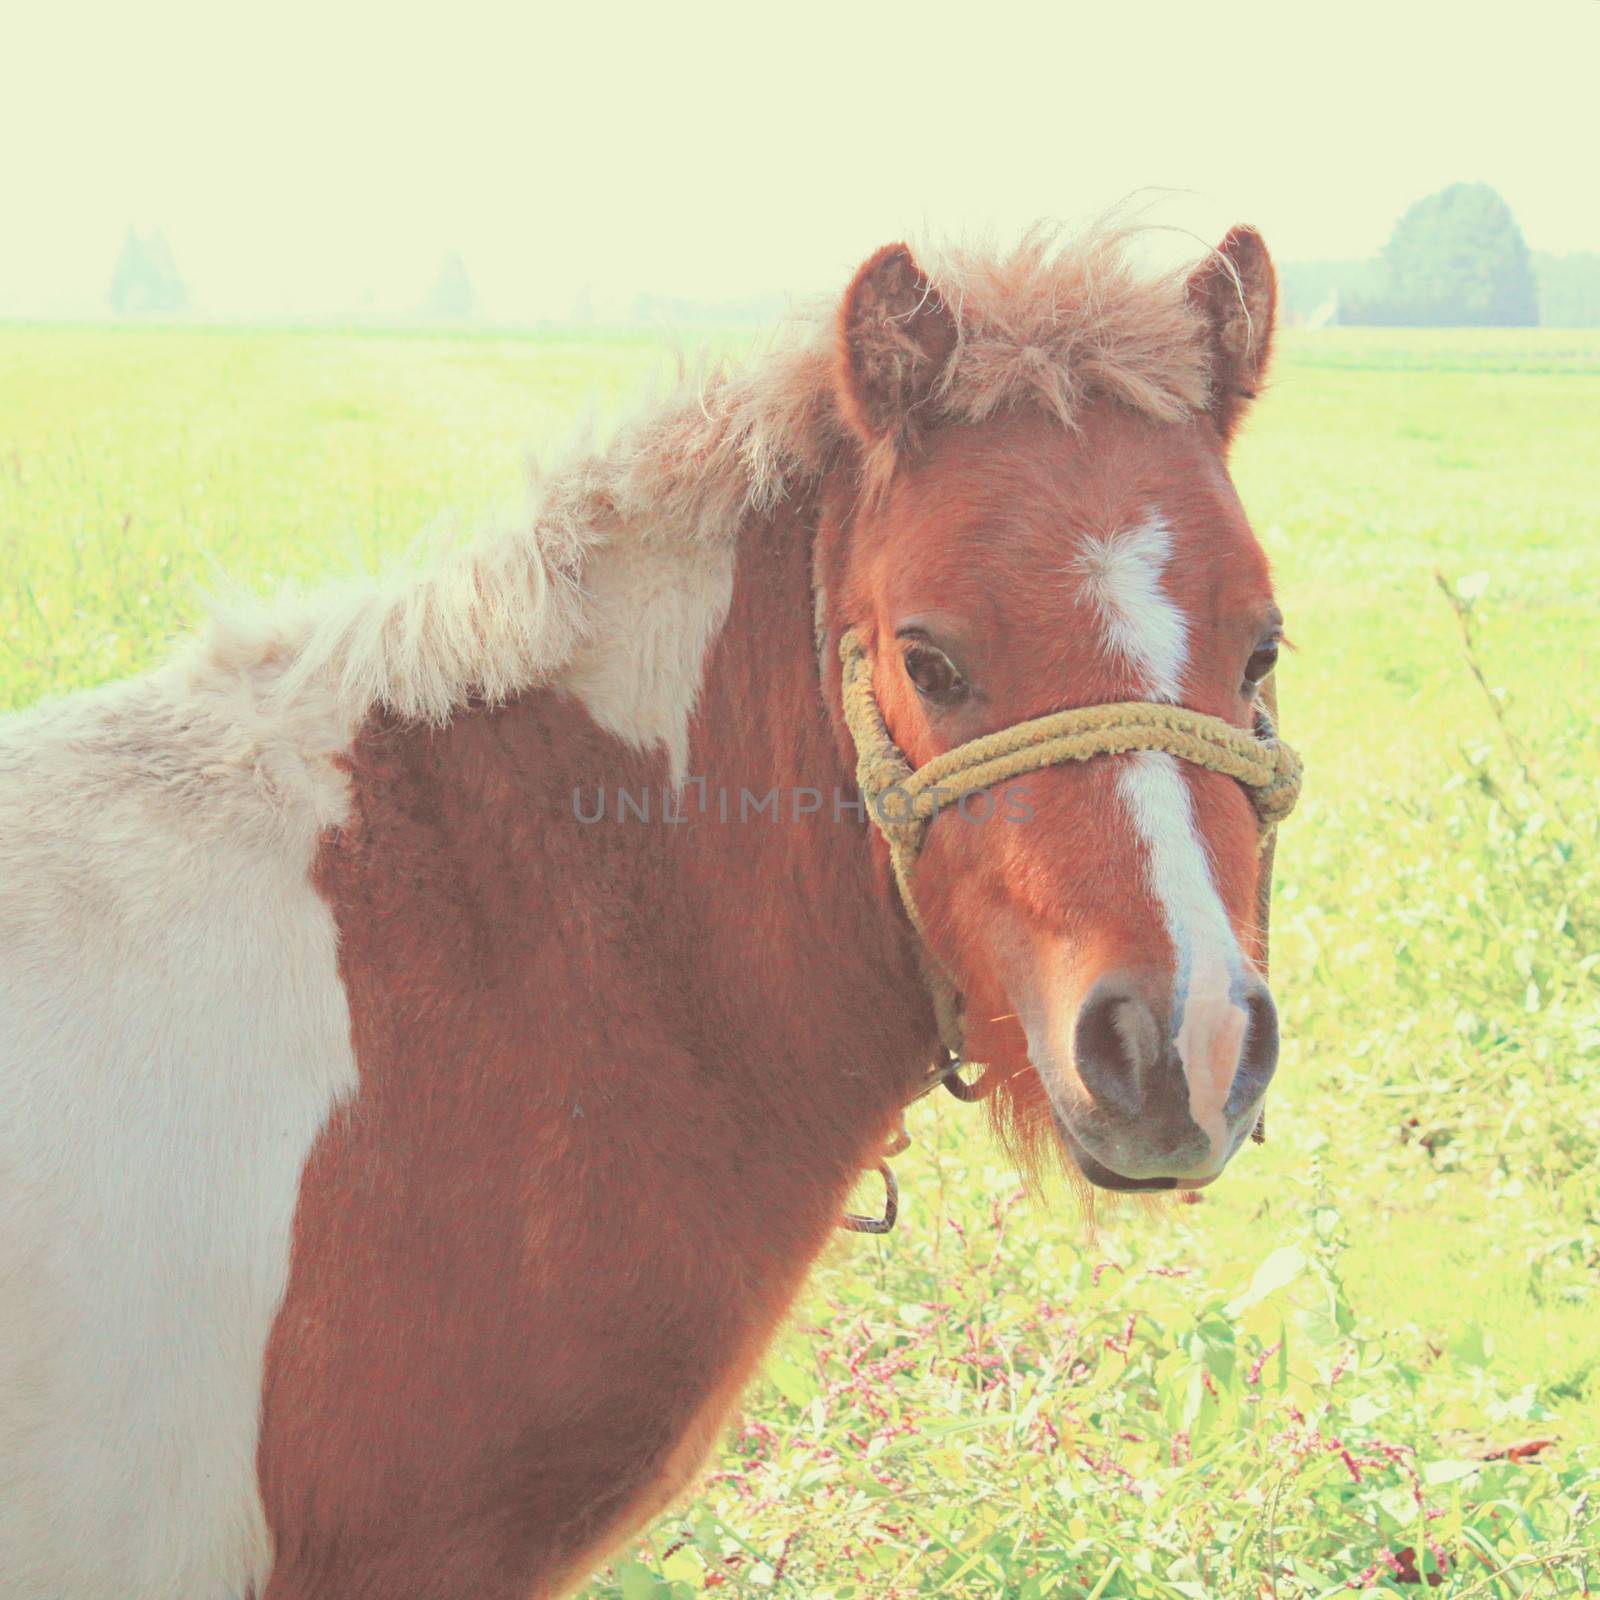 A pony in farmland with retro filter effect by nuchylee